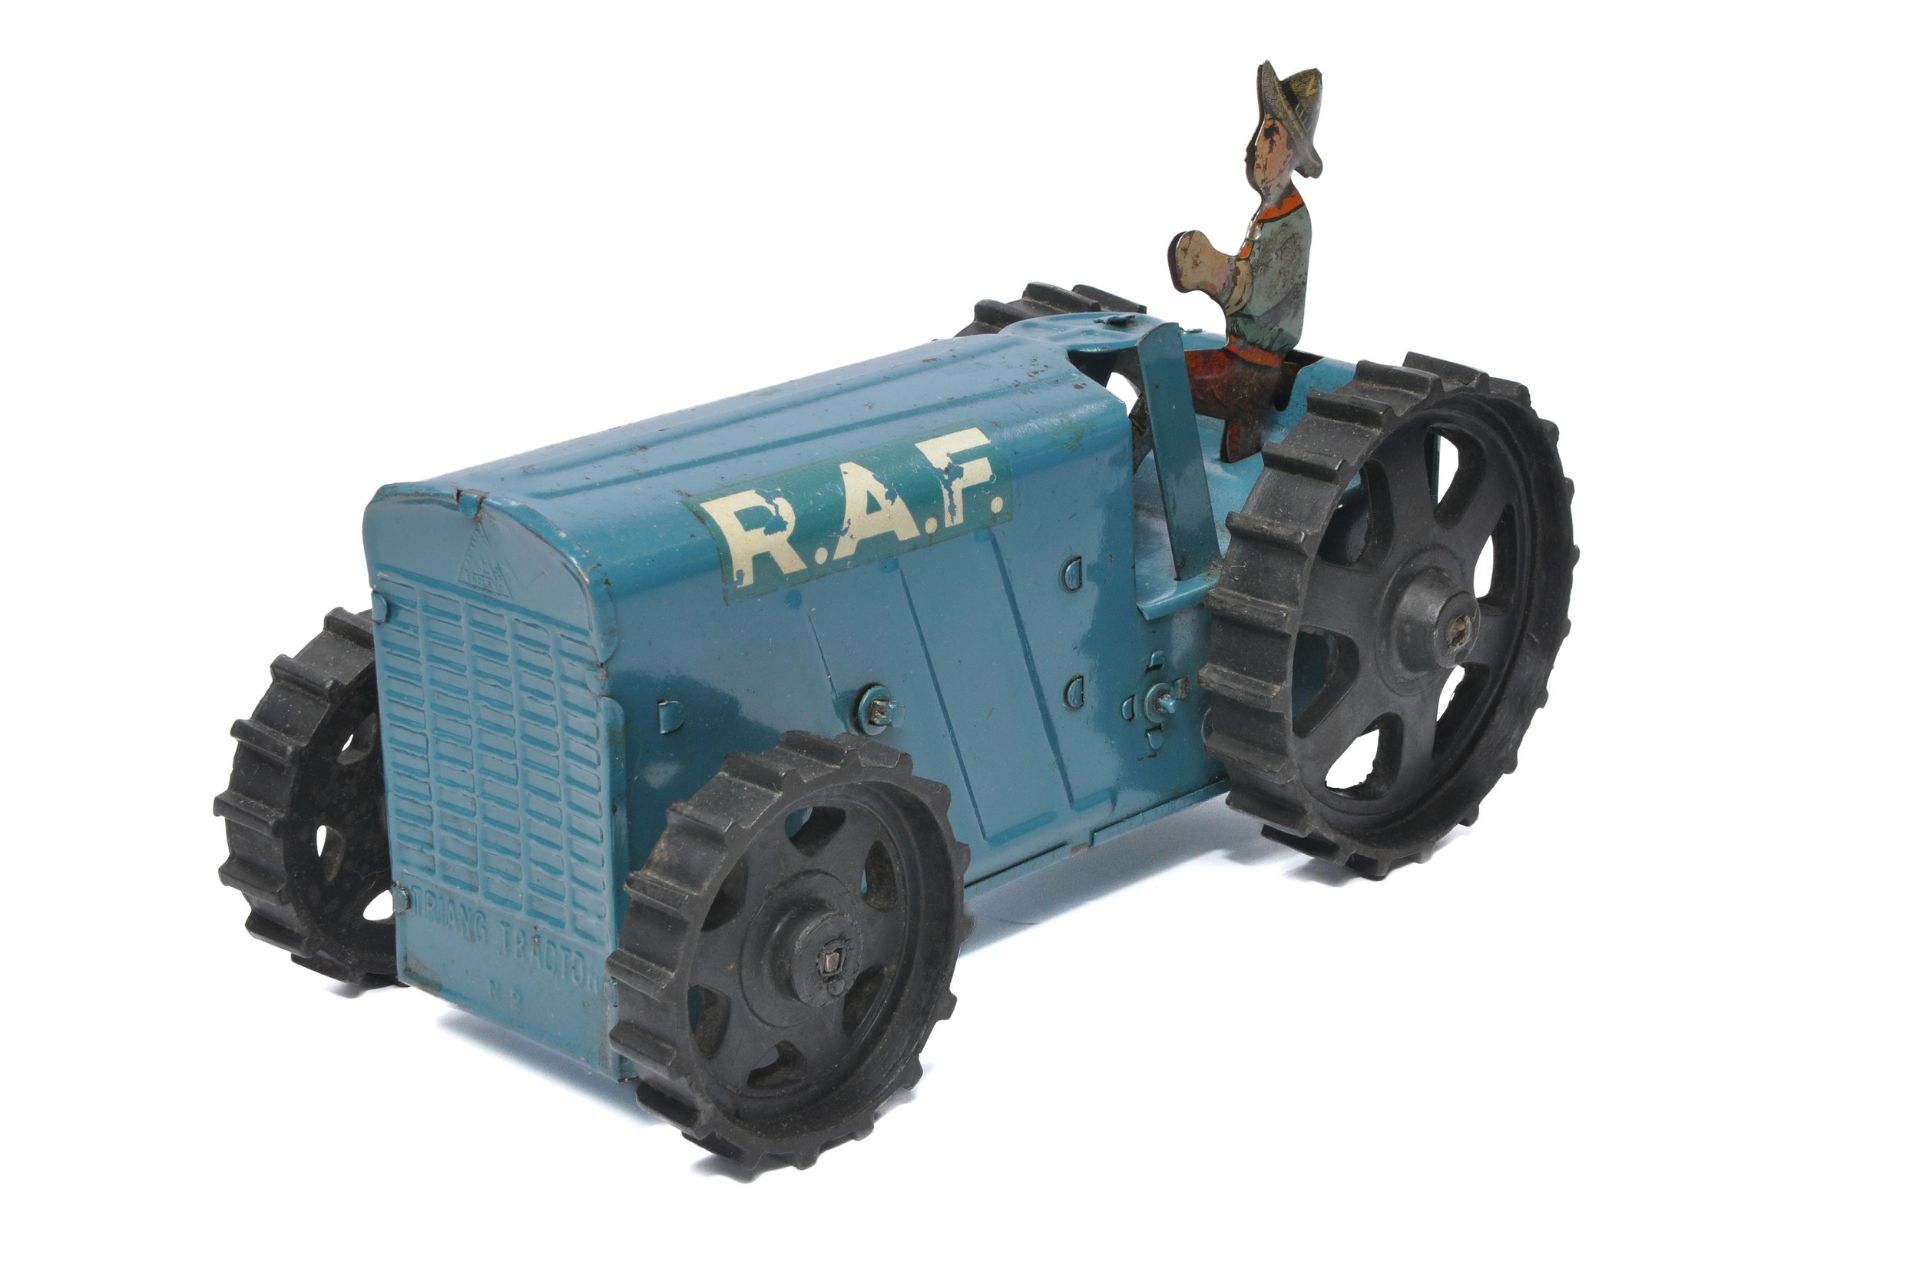 Triang No. 2 Mechanical Tinplate RAF Crawler Tractor in blue. In good working order. Displays